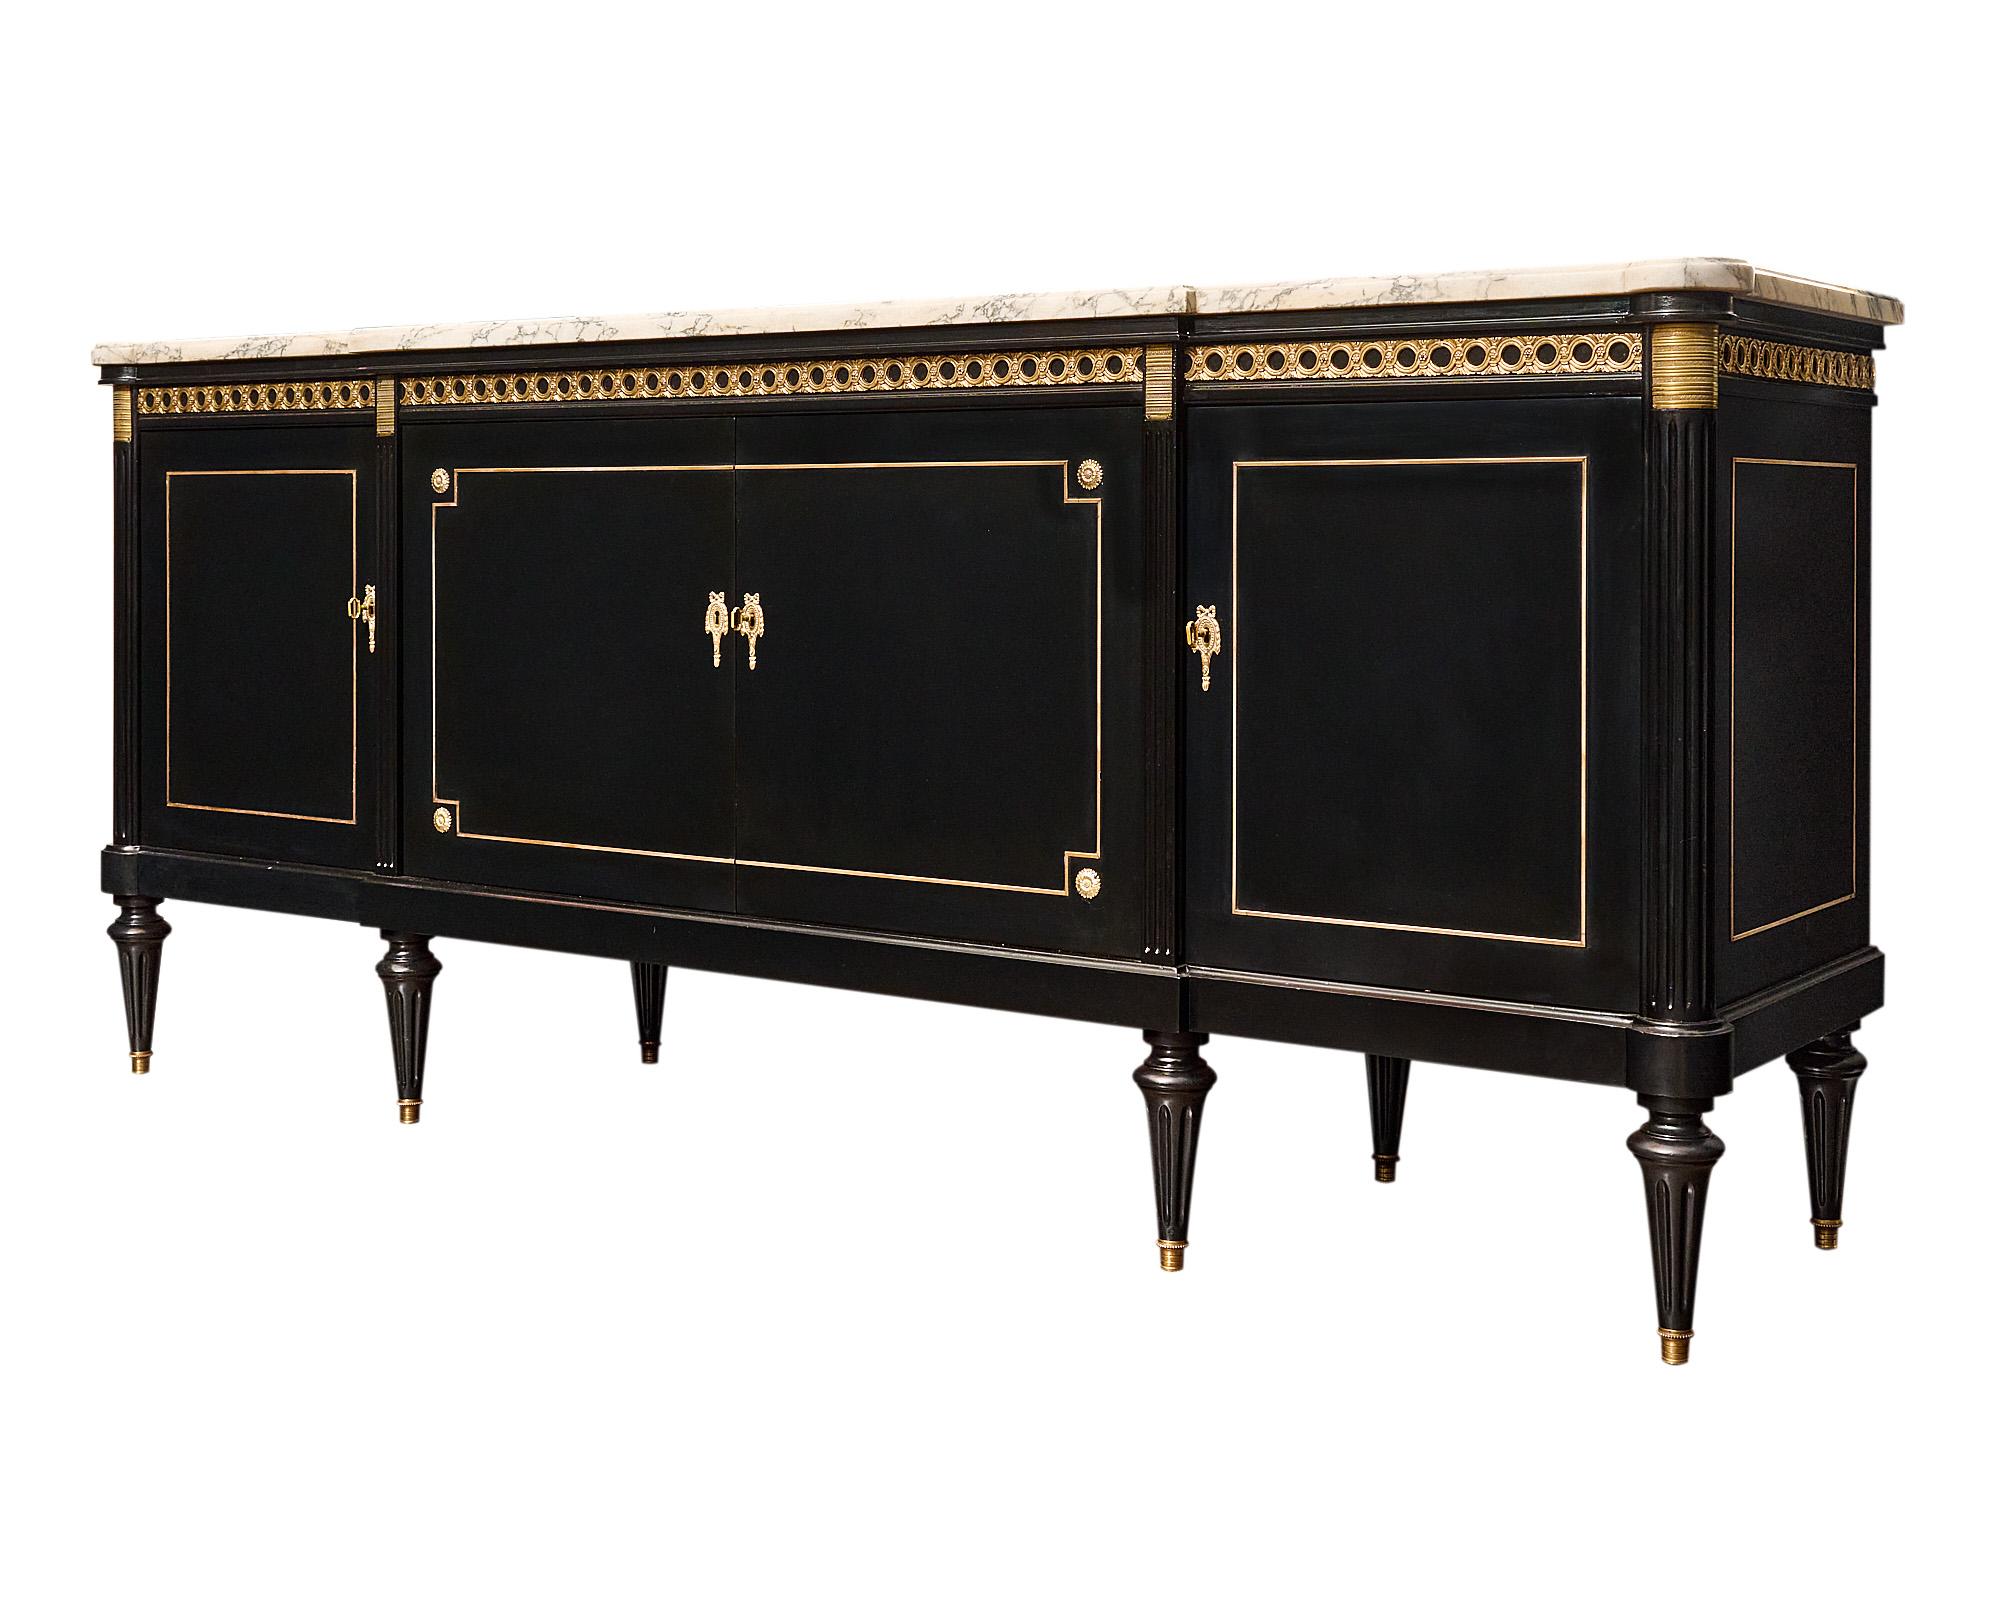 This French Buffet/Enfilade is a remarkable piece crafted in Paris, France, reflecting the elegant Louis XVI style. Made with care from Mahogany, it features four doors that open to reveal adjustable shelves and drawers. The exquisite ebony finish,